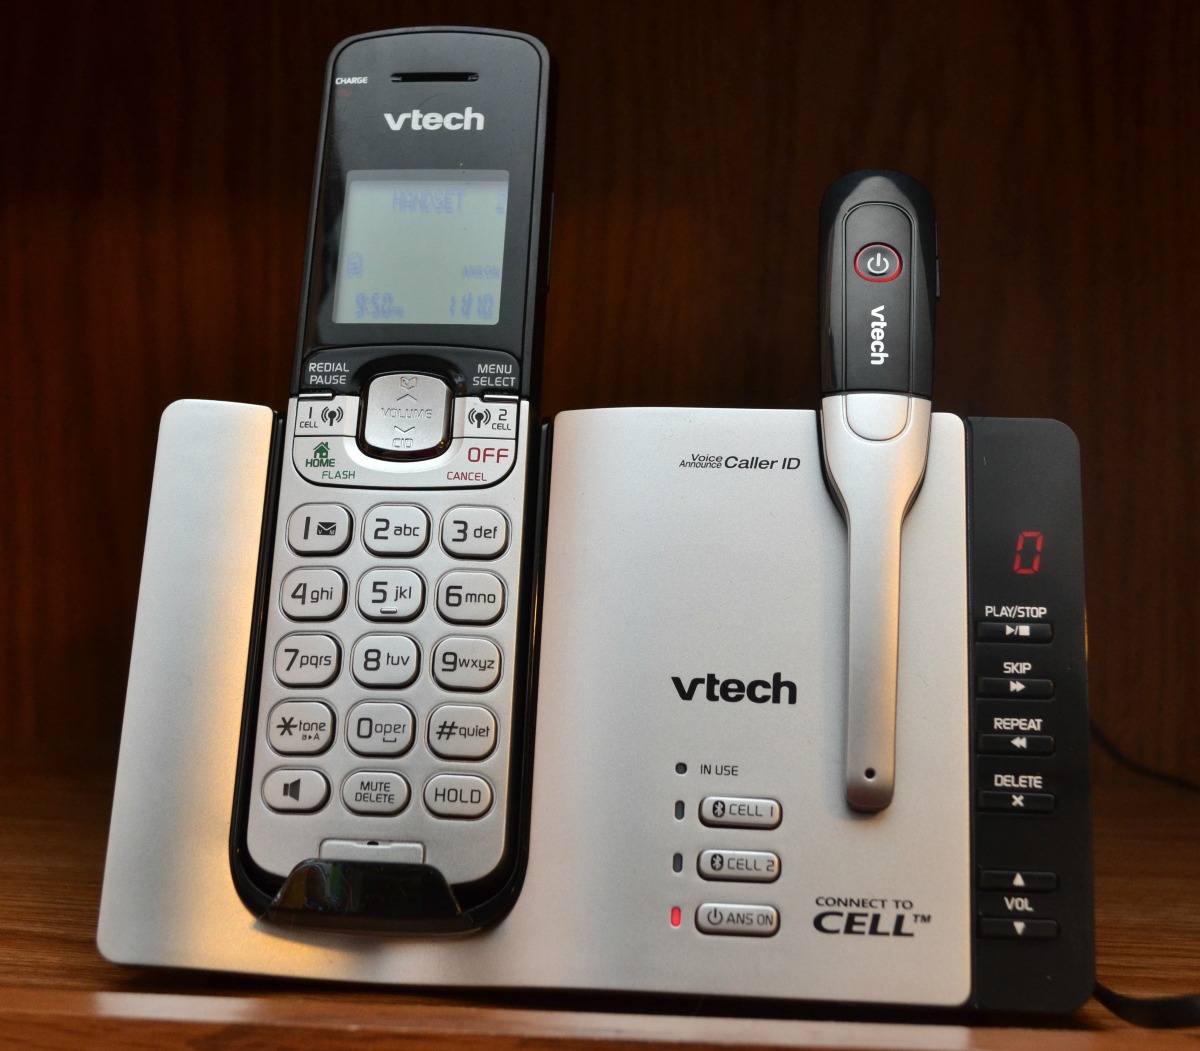 VTech's New Phone Helps Moms! (No Home Phone Service Required 